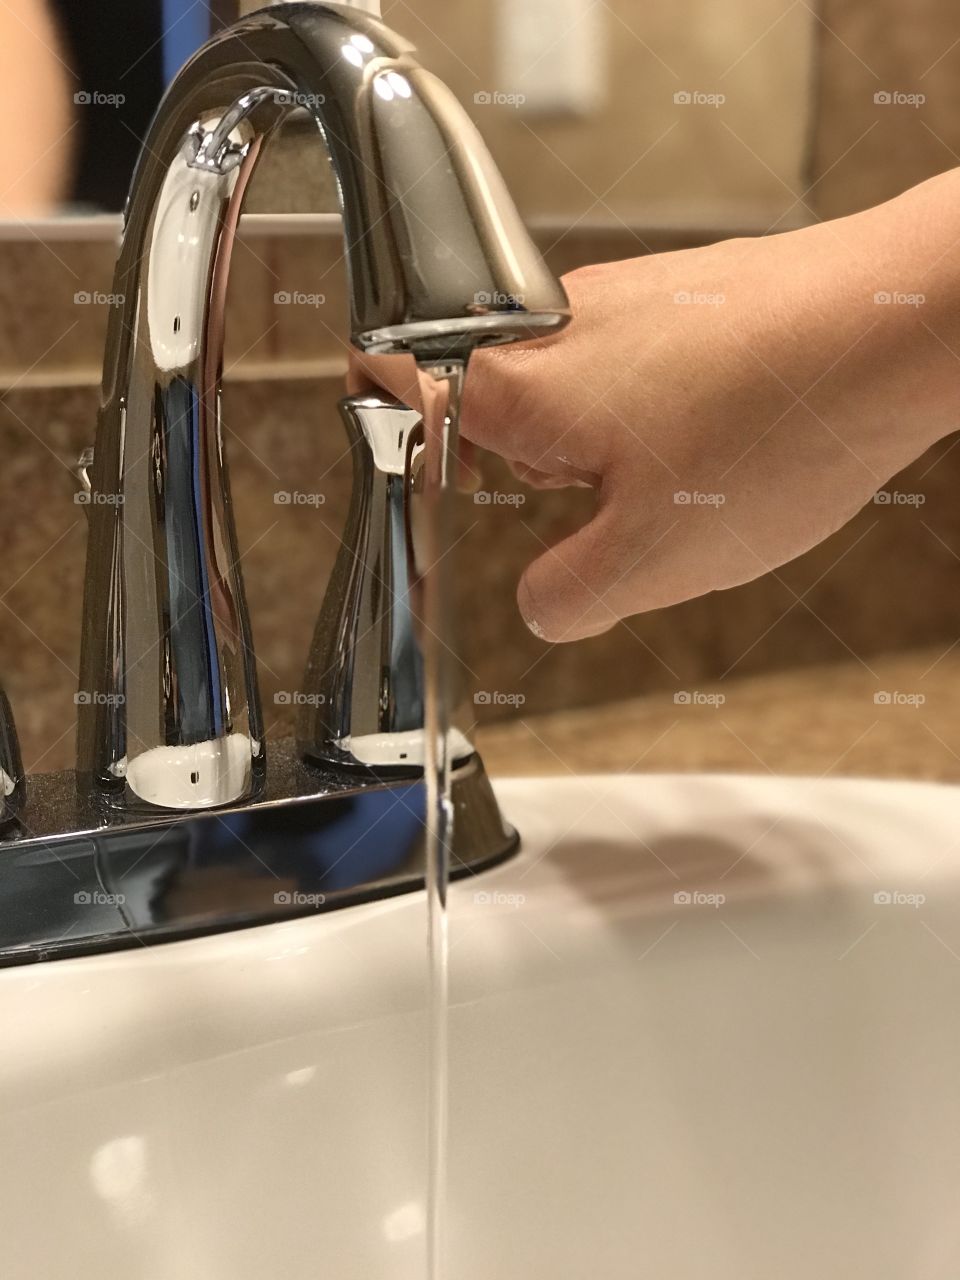 Washing your hands is a must throughout the day